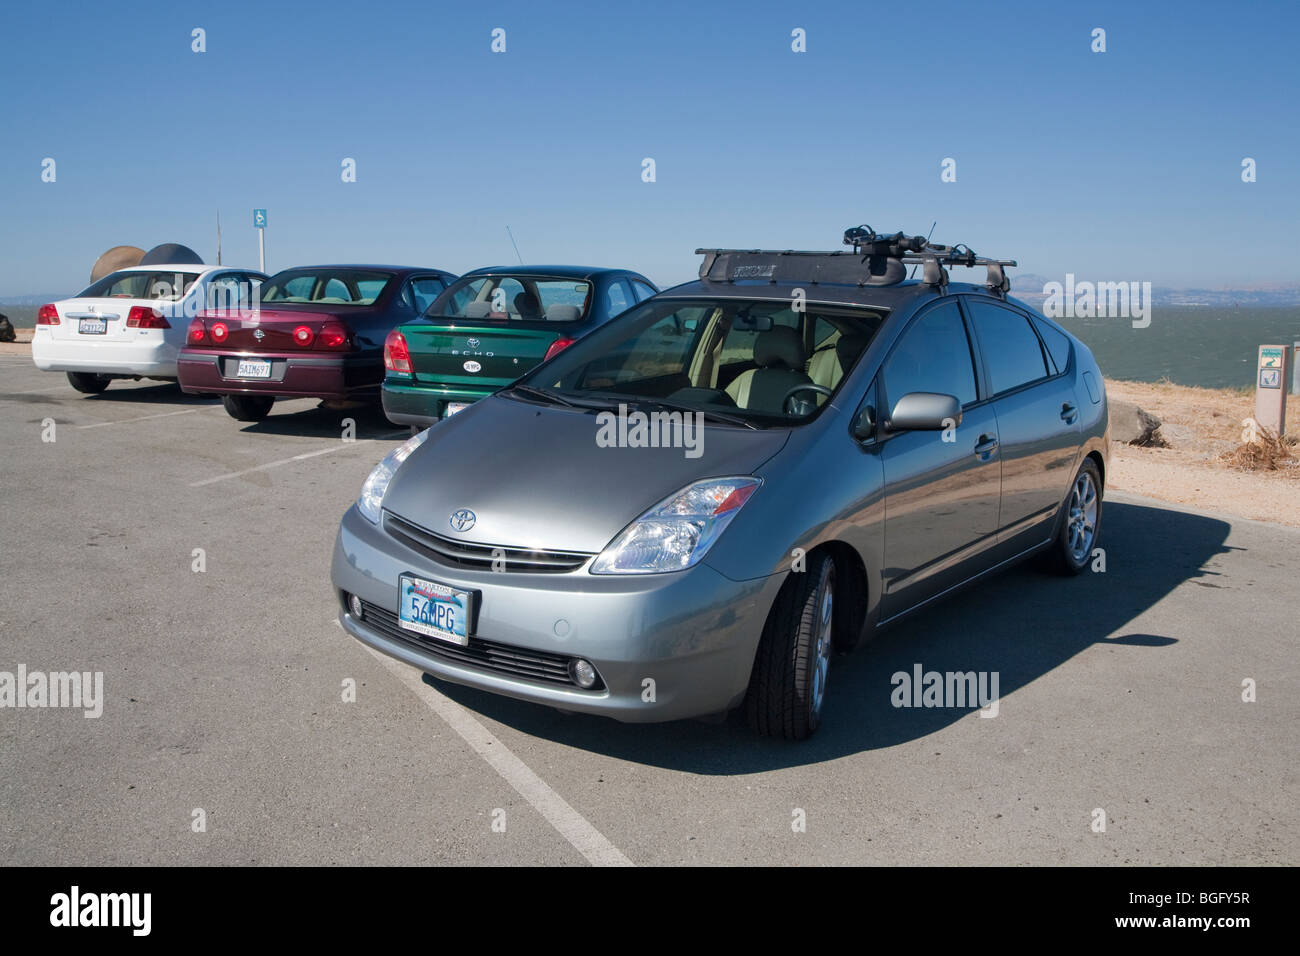 2004 Toyota Prius has a '56 MPG' custom license plate. People pay for customized plates and proceeds support various causes. Stock Photo